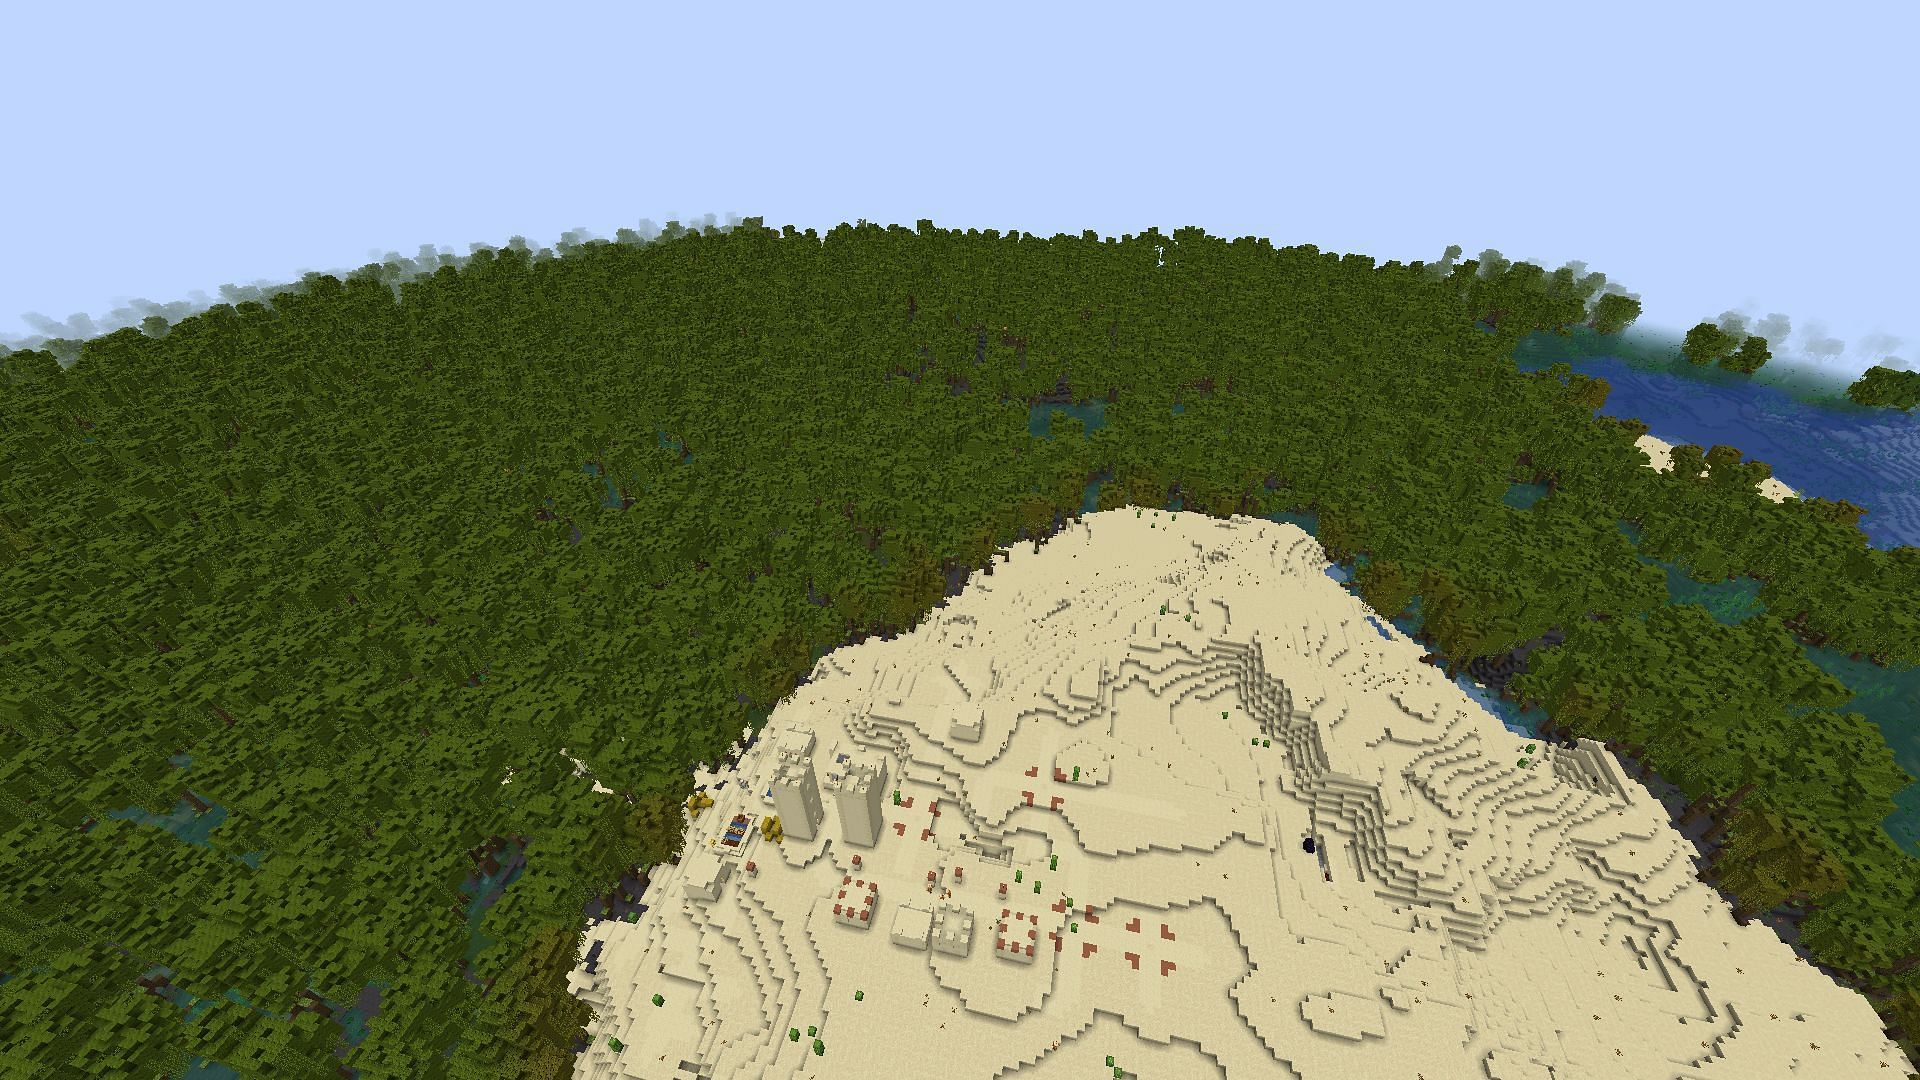 High render distance will always slow down Minecraft (Image via Mojang)